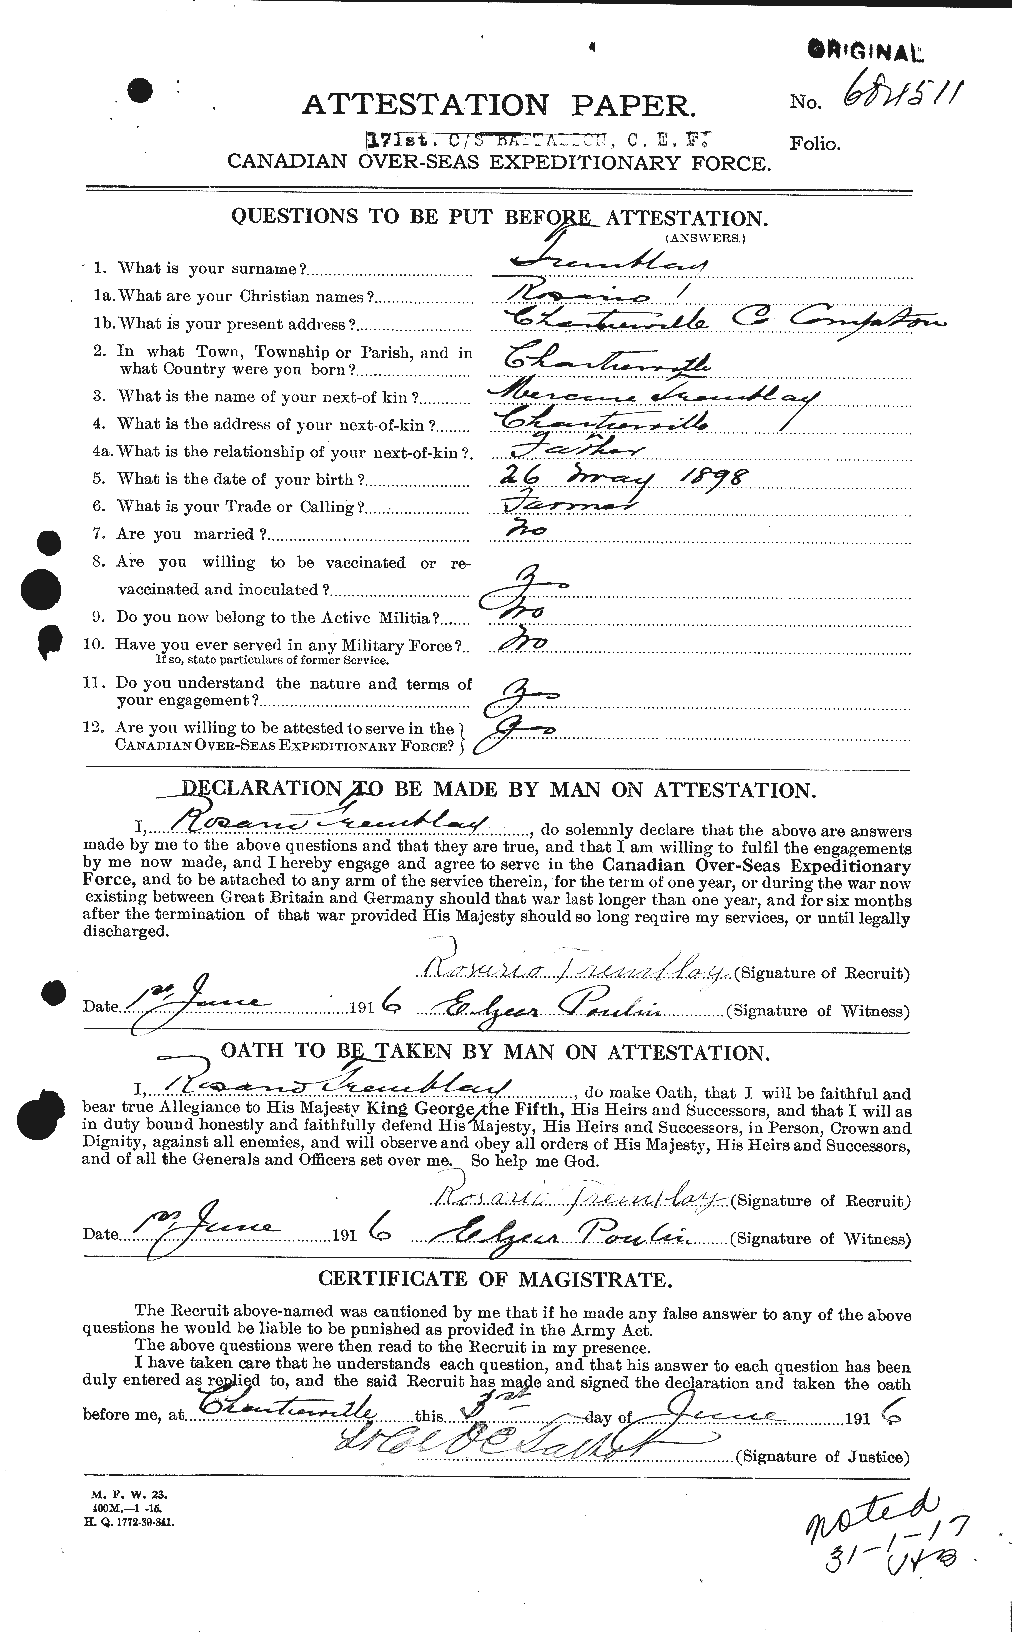 Personnel Records of the First World War - CEF 638298a